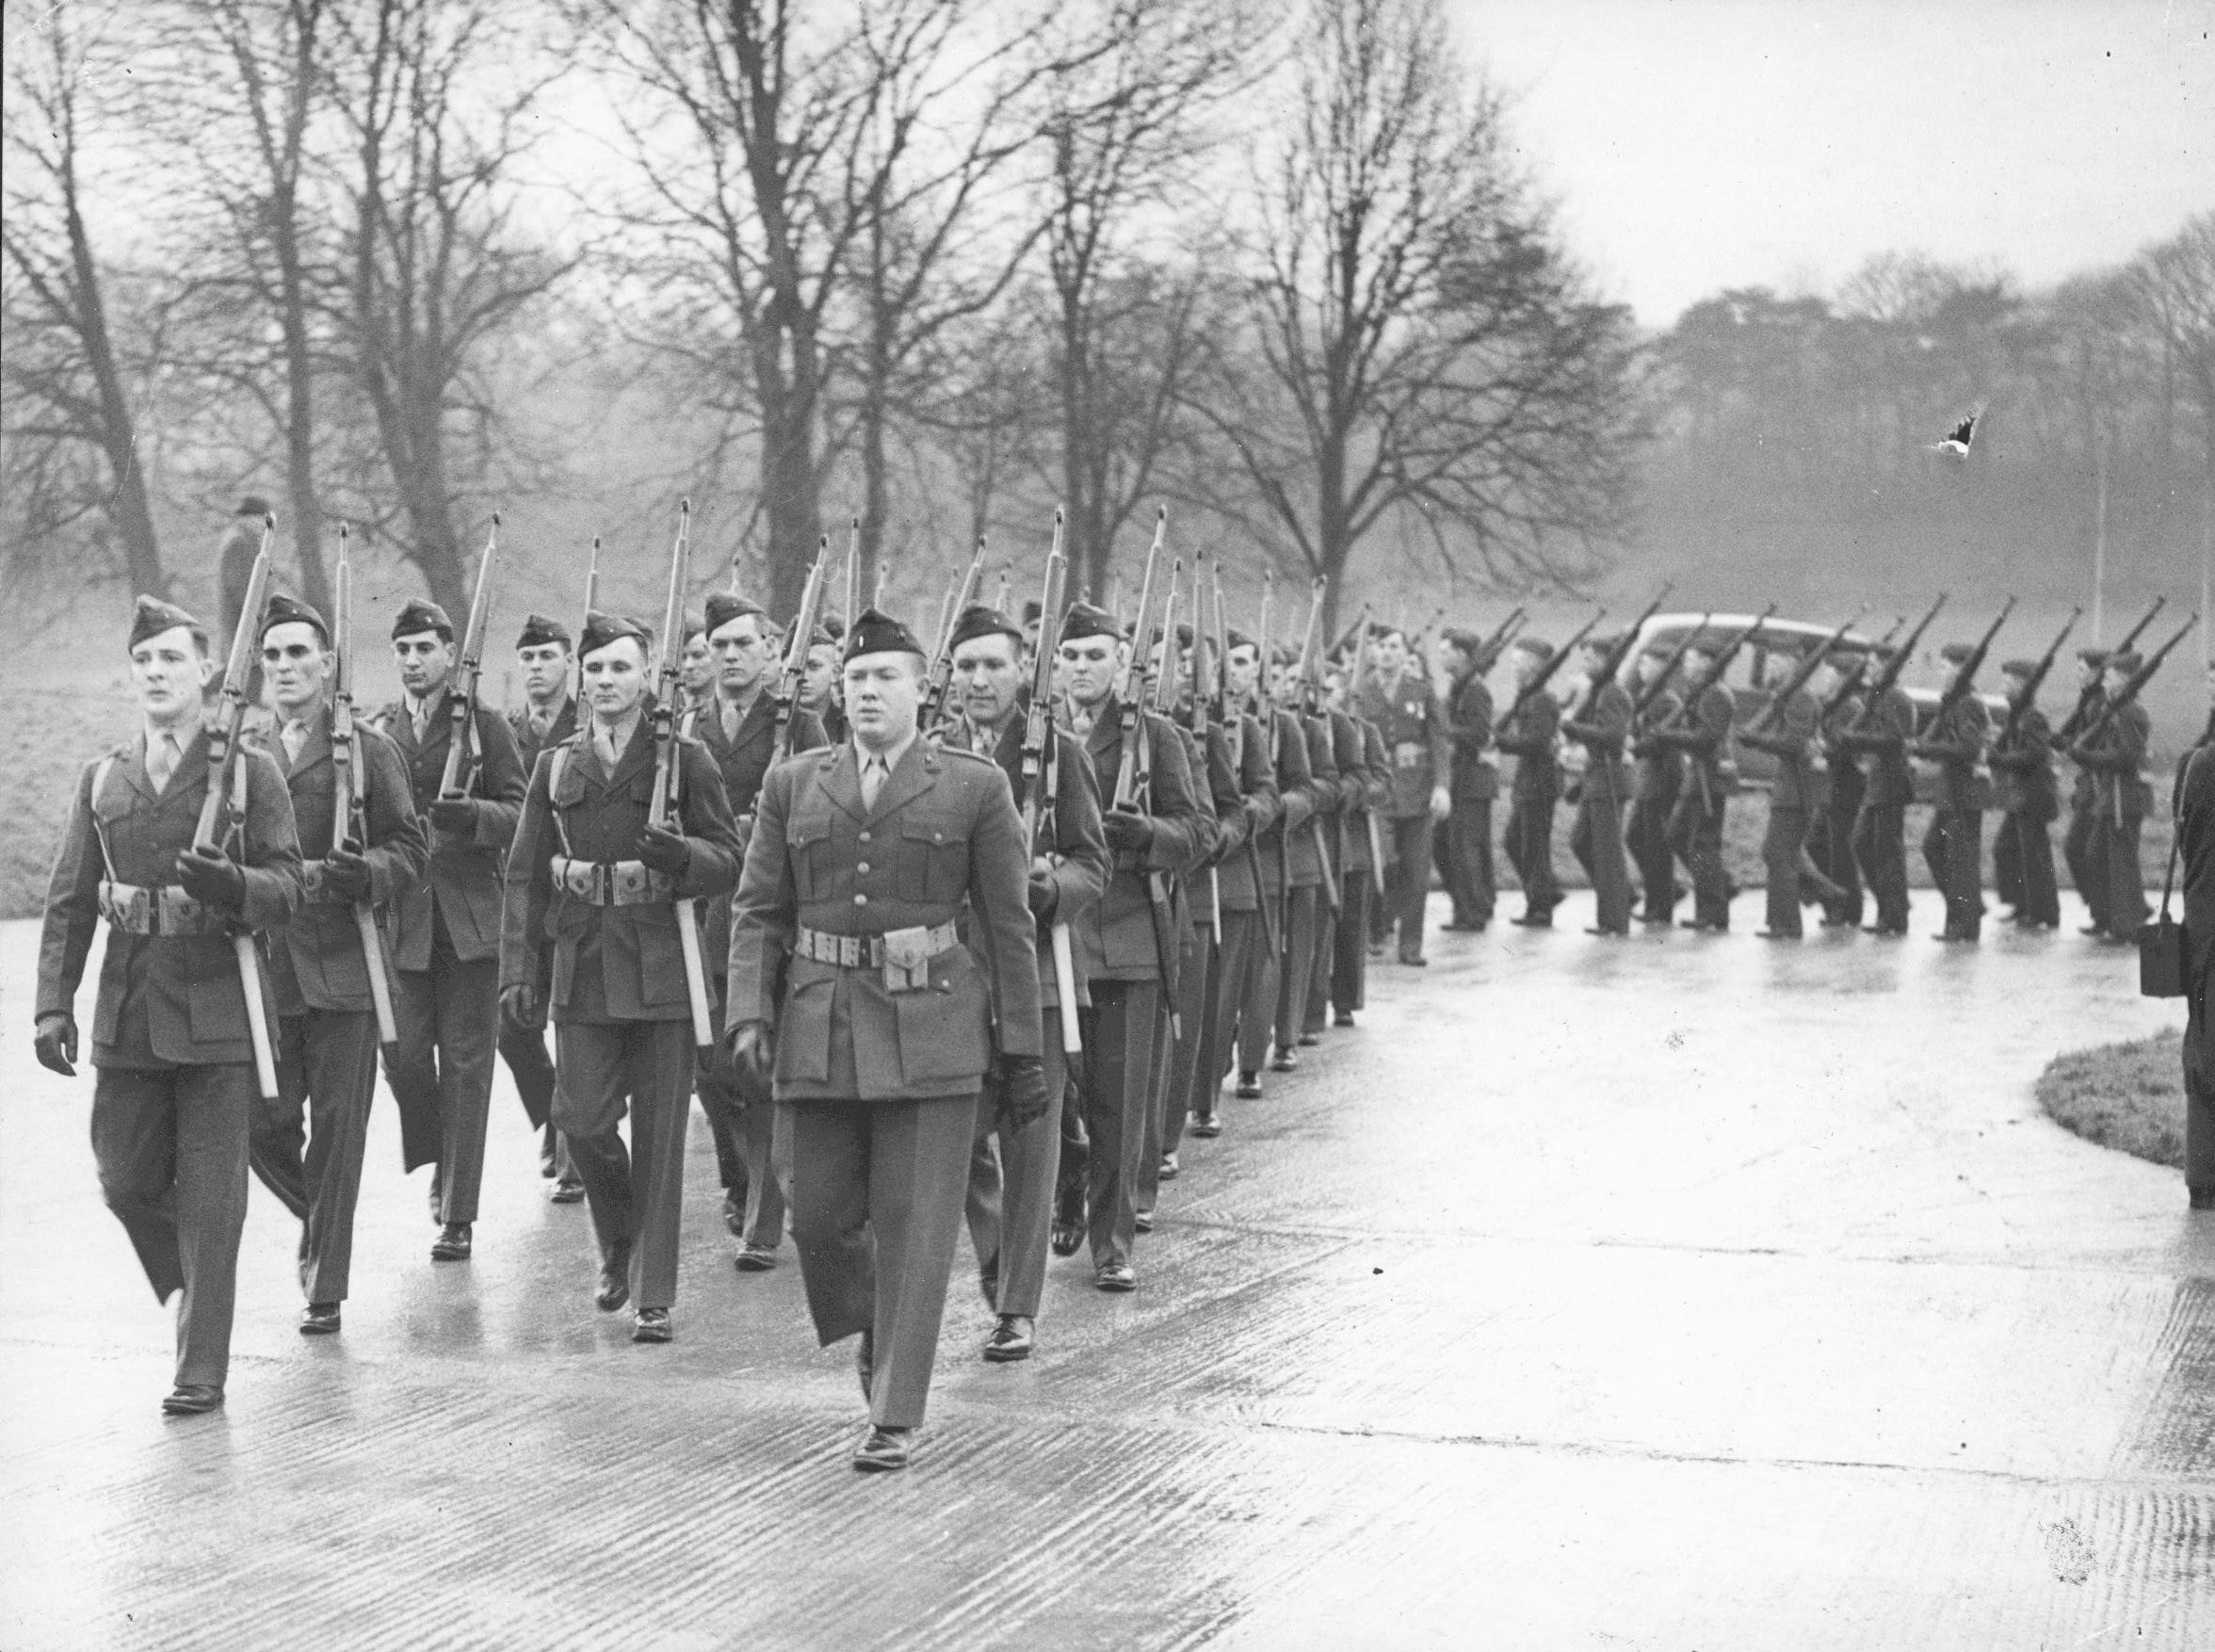 US Marines on parade for the occasion of the opening of the Allied Officers Club in Londonderry, Northern Ireland, United Kingdom, Jan 1943